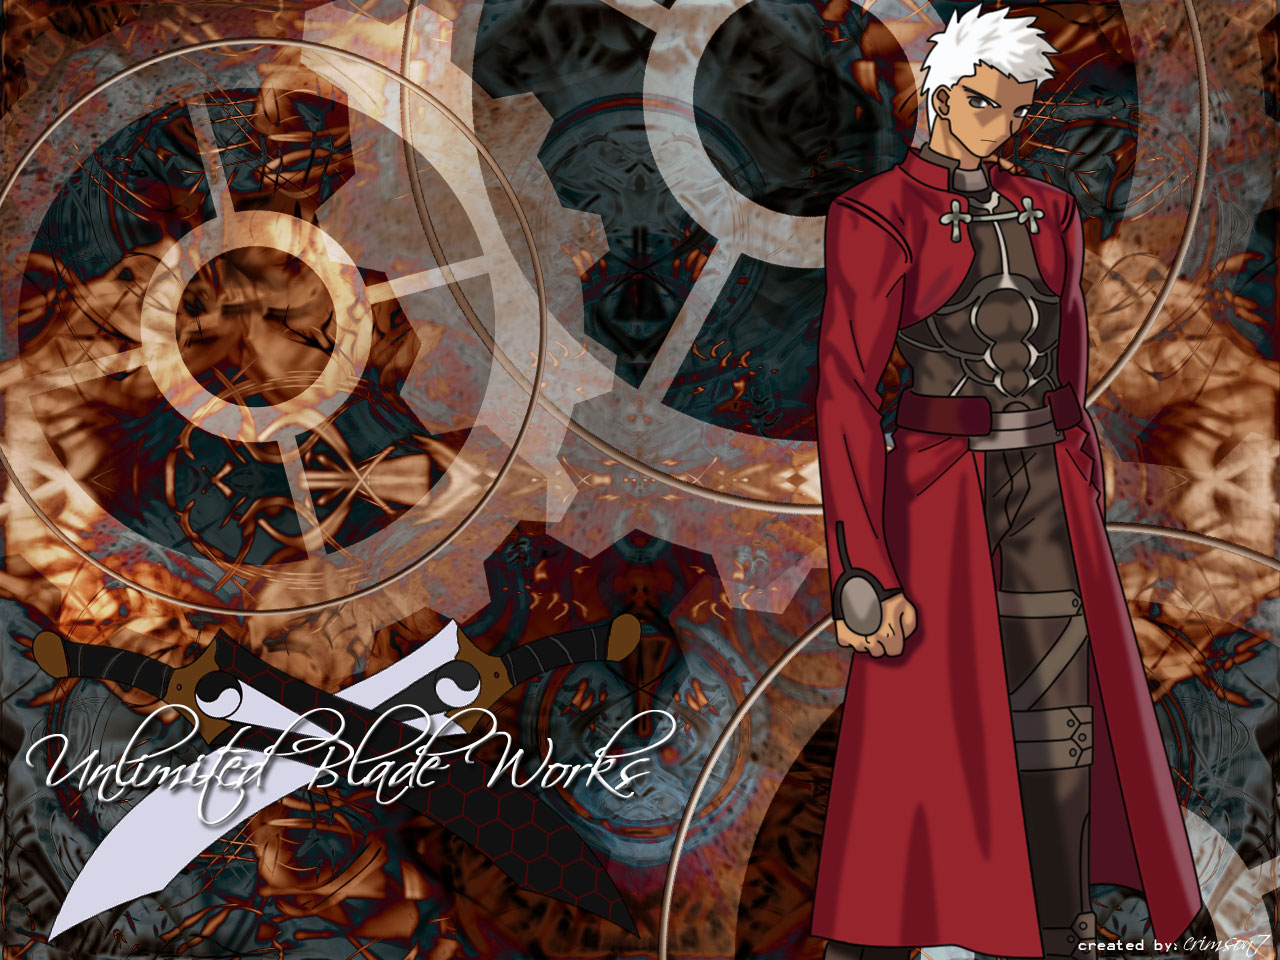 Fate/Stay Night: Unlimited Blade Works Picture